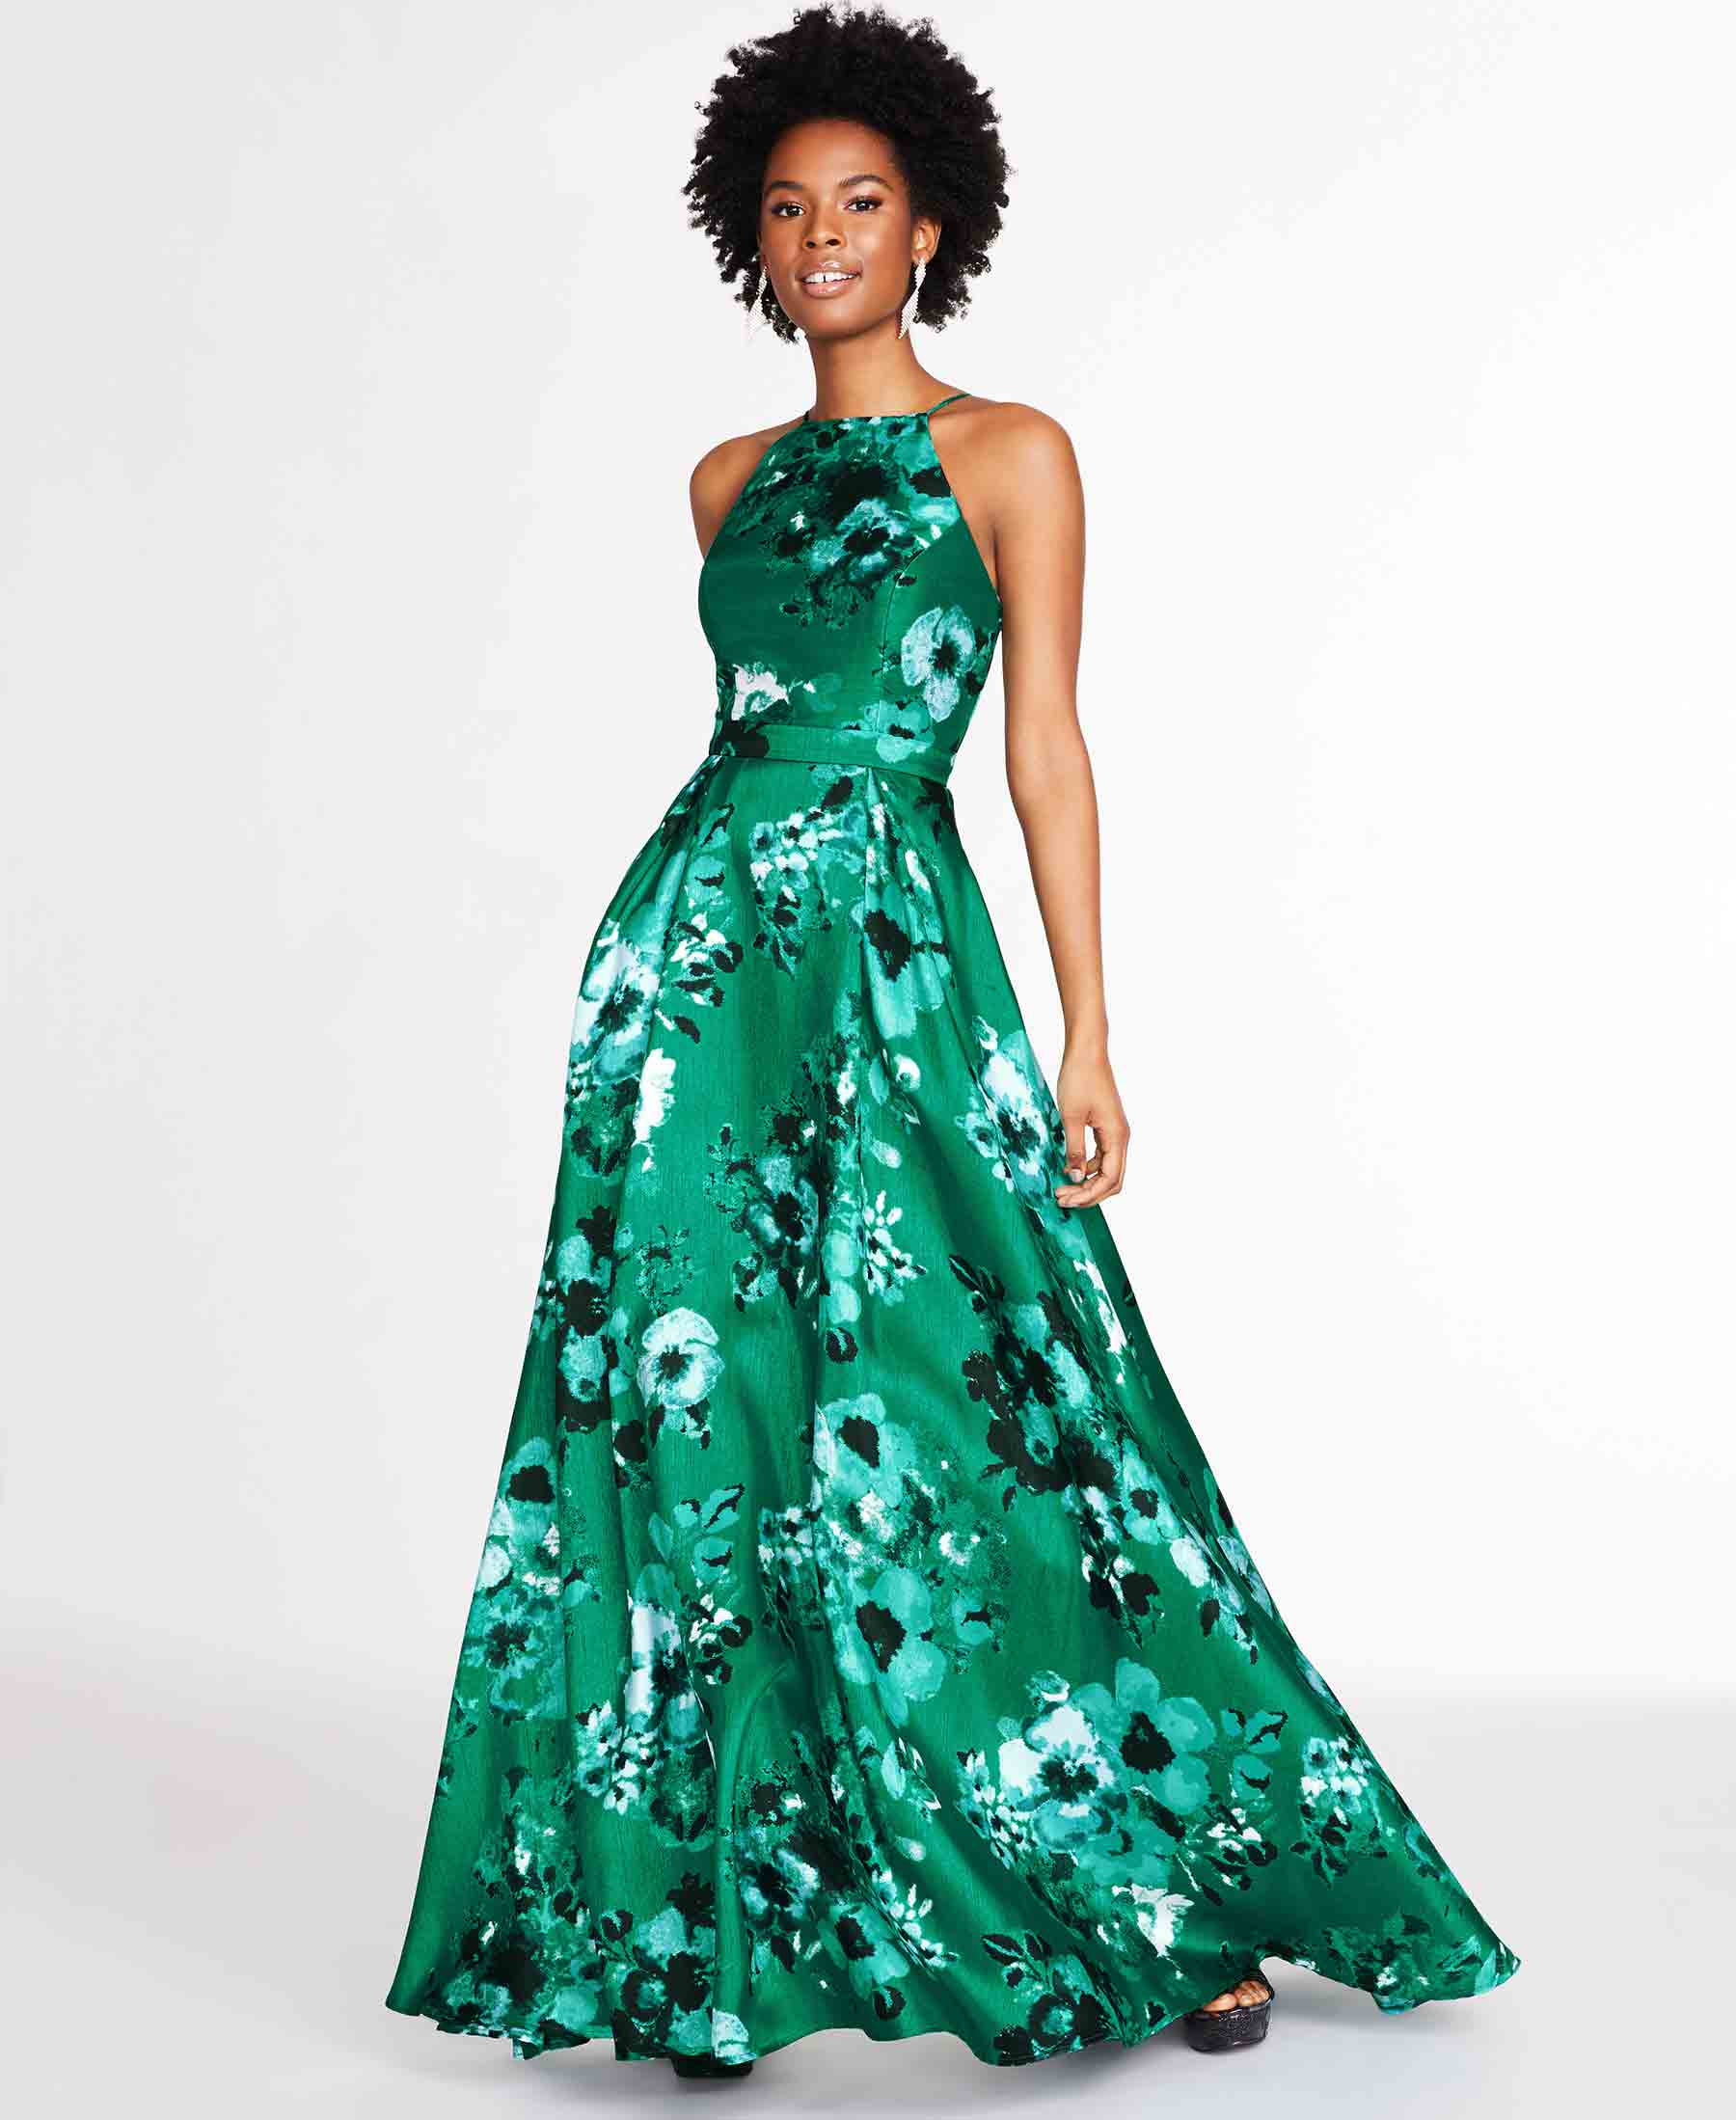 Perfect Your Prom Style at Macy’s Fashion Trendsetter